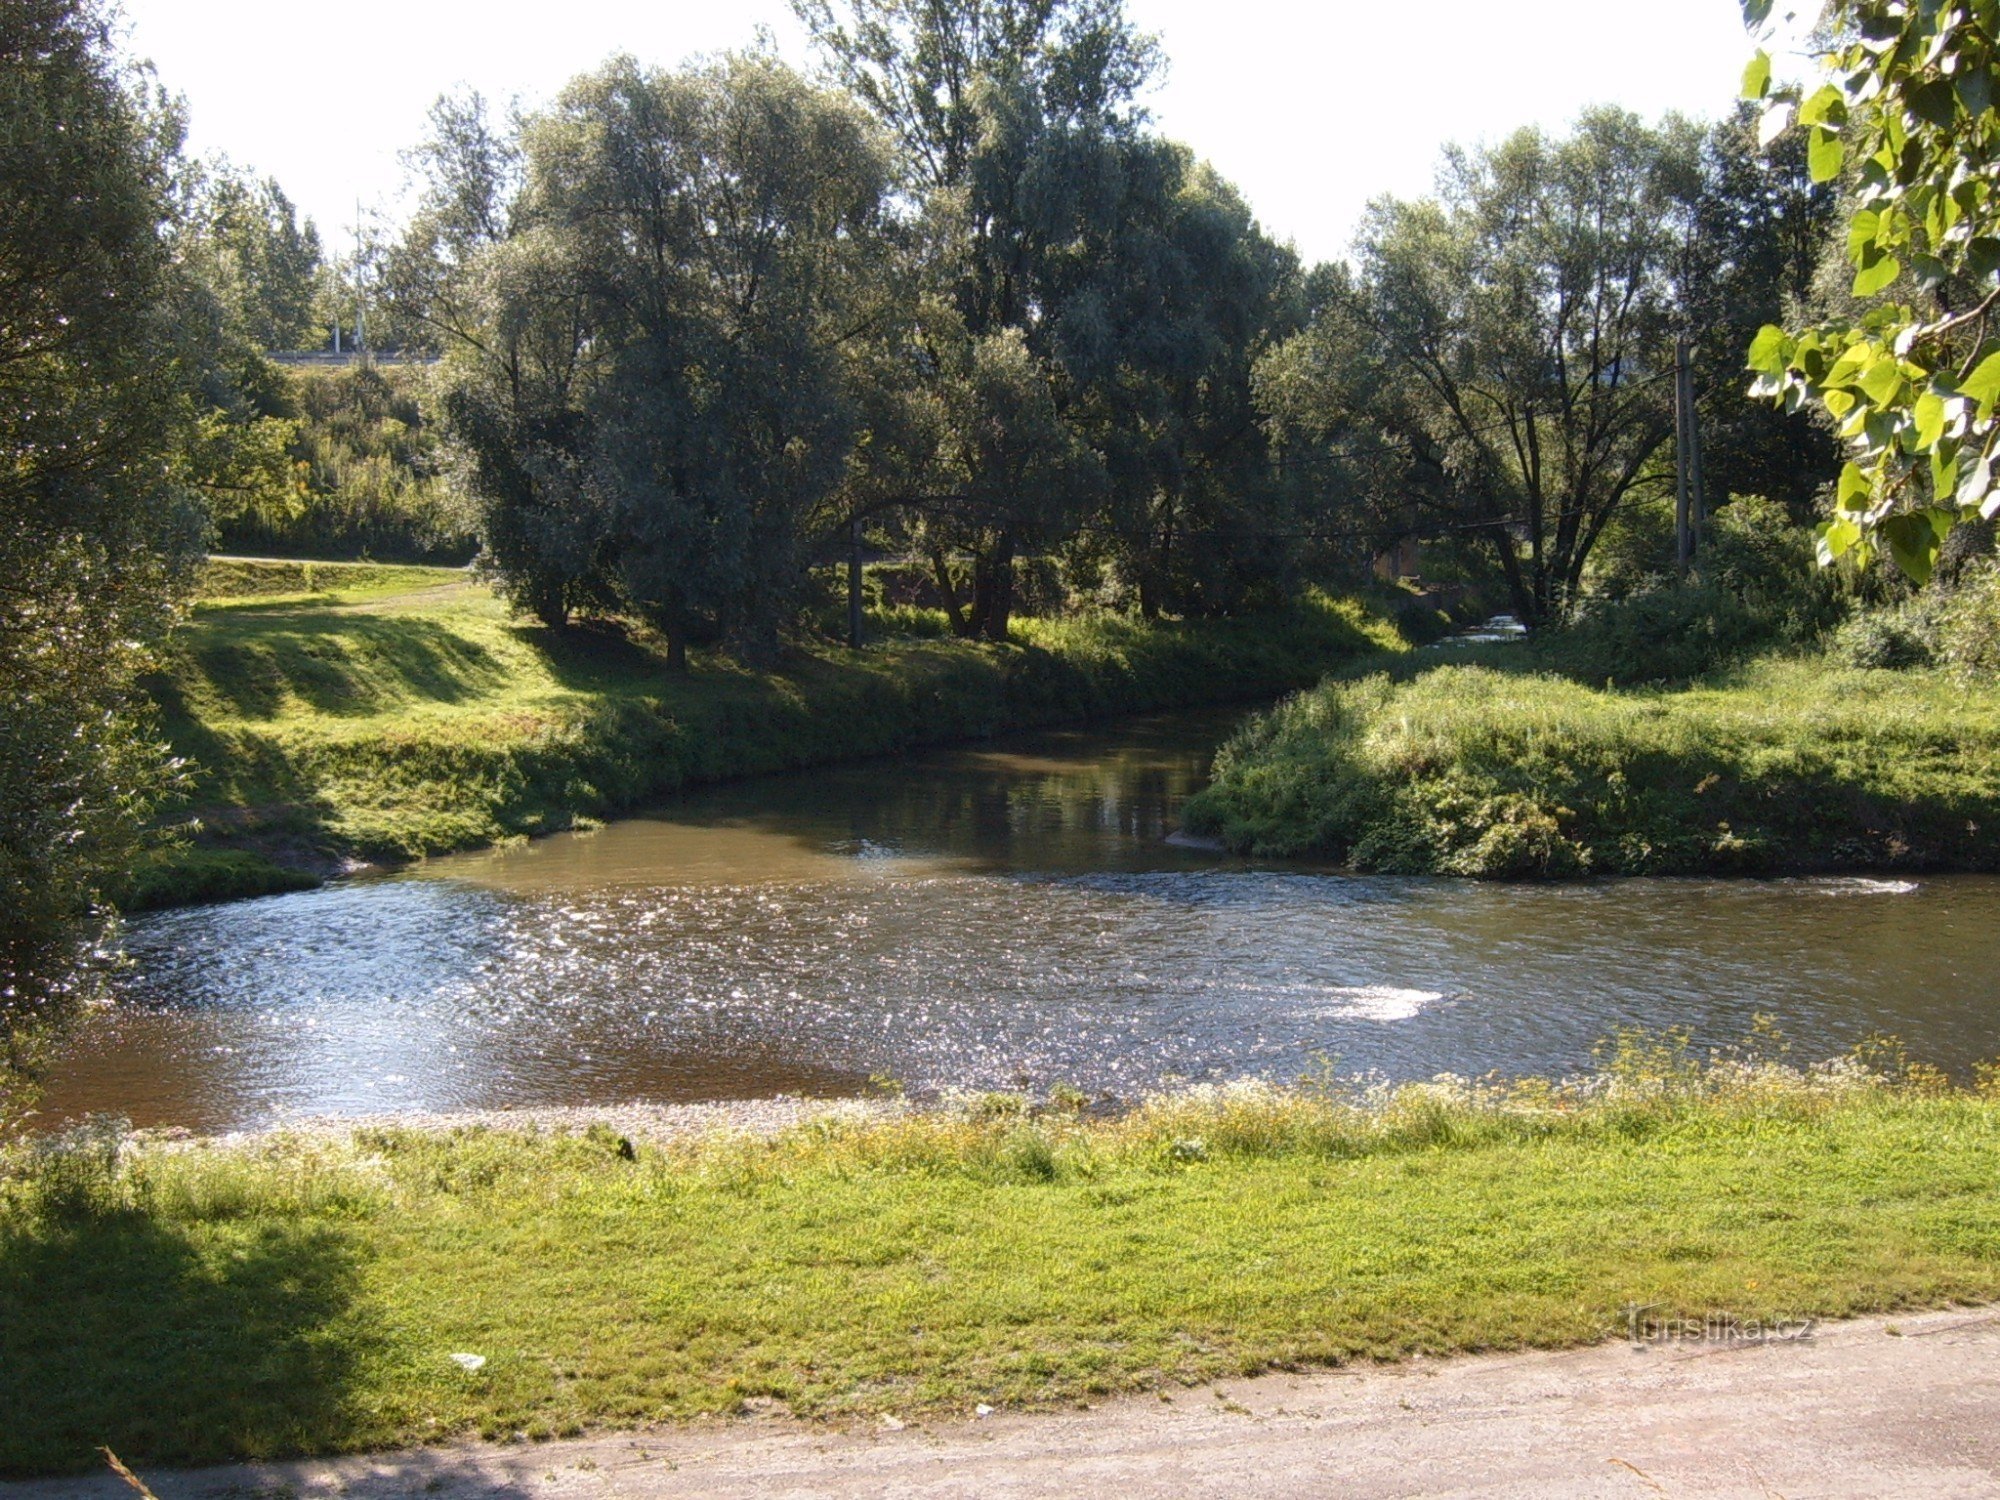 Confluence of Ostravice and Lučina